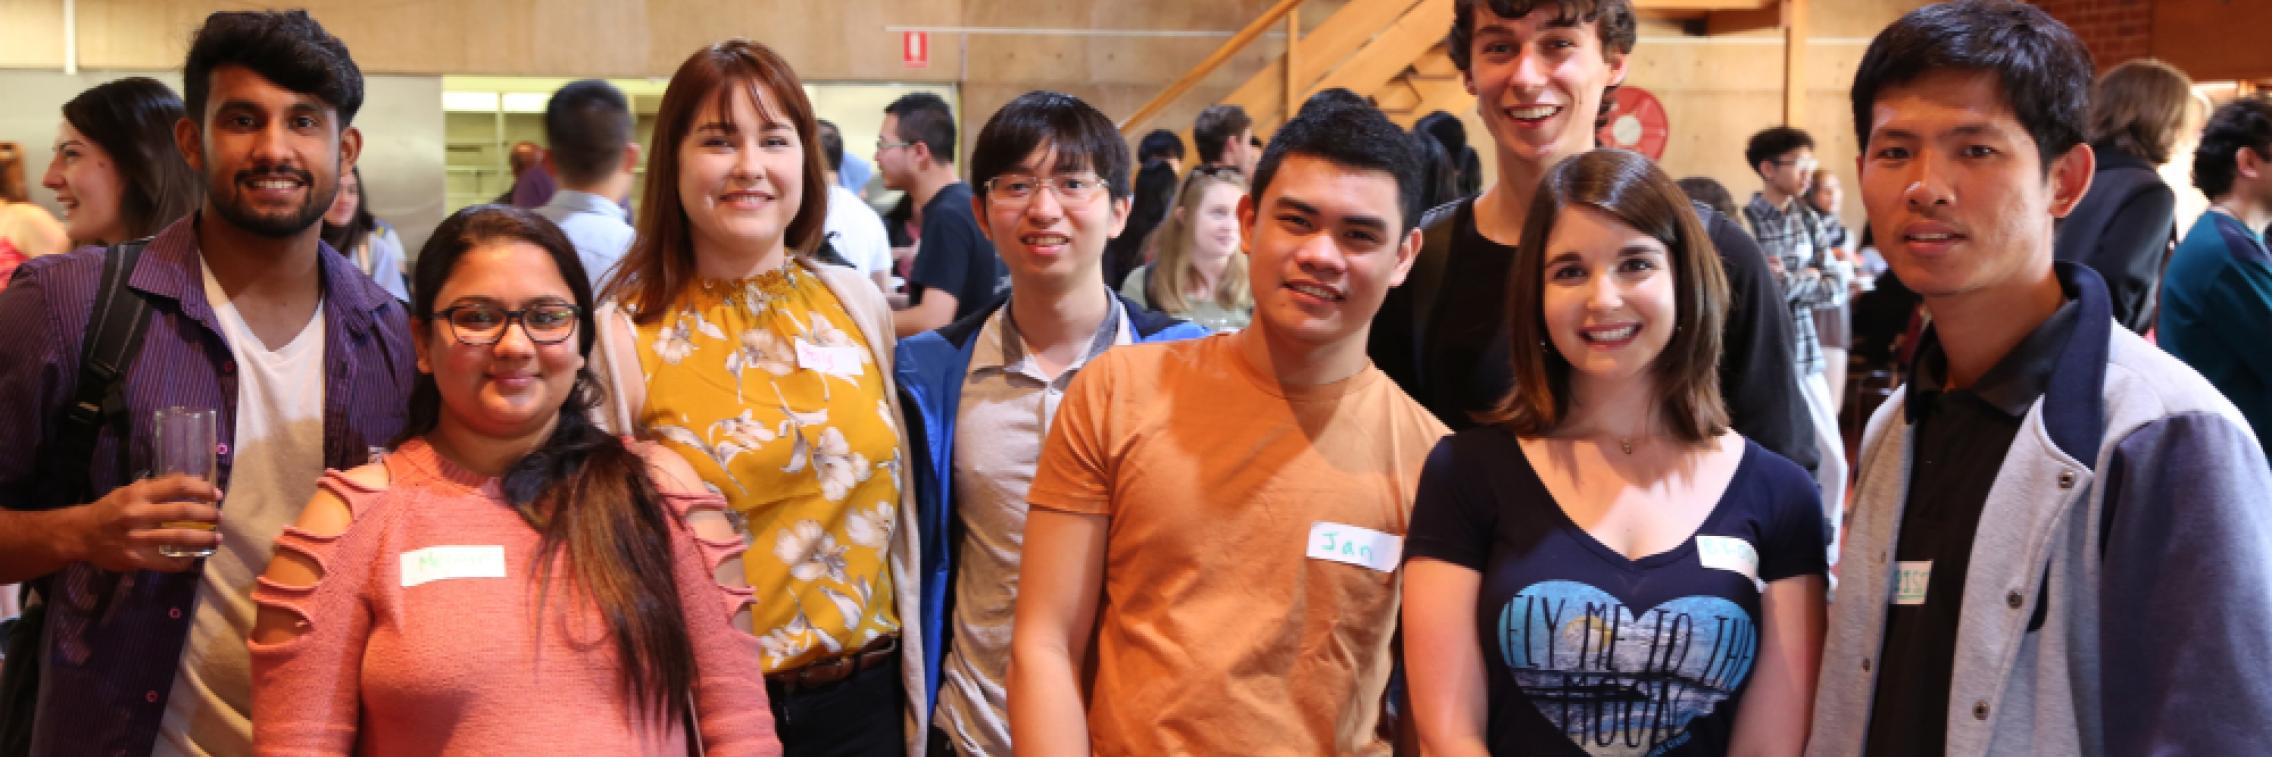 Members of the Global IQ connect group gathered together at a group function